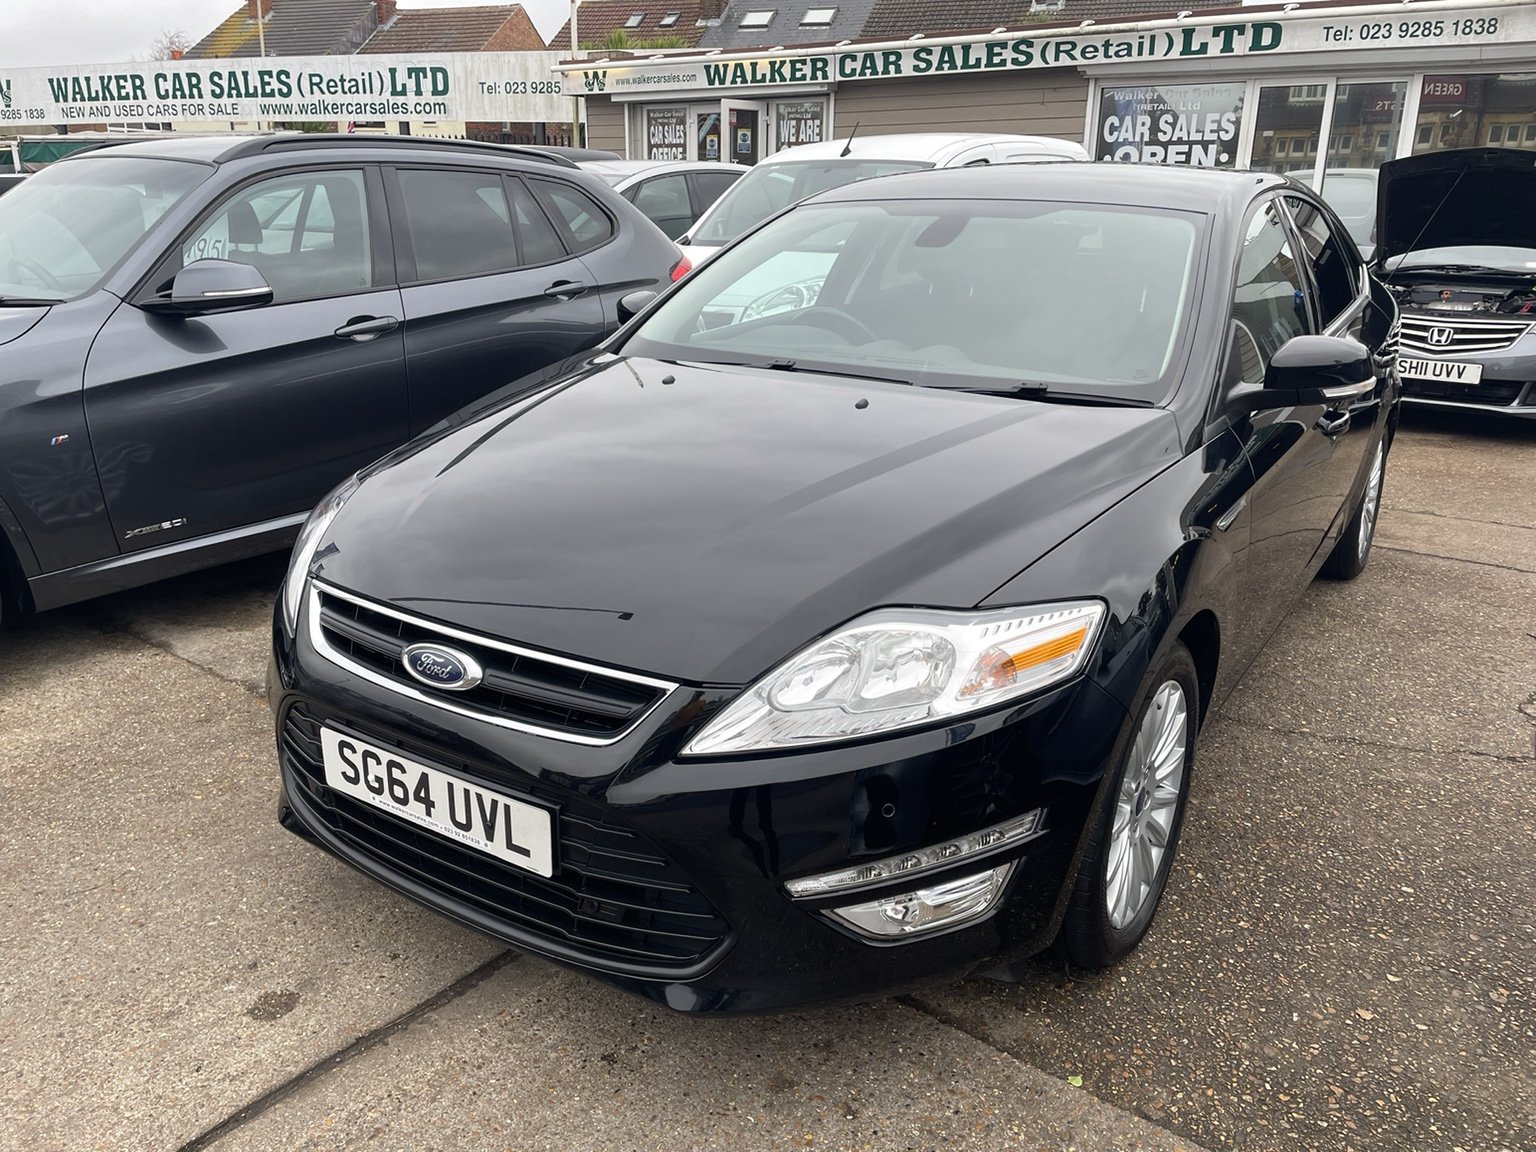 Used 2014 Ford Mondeo 1.6 TDCi Eco Zetec Business Edition 5dr [SS